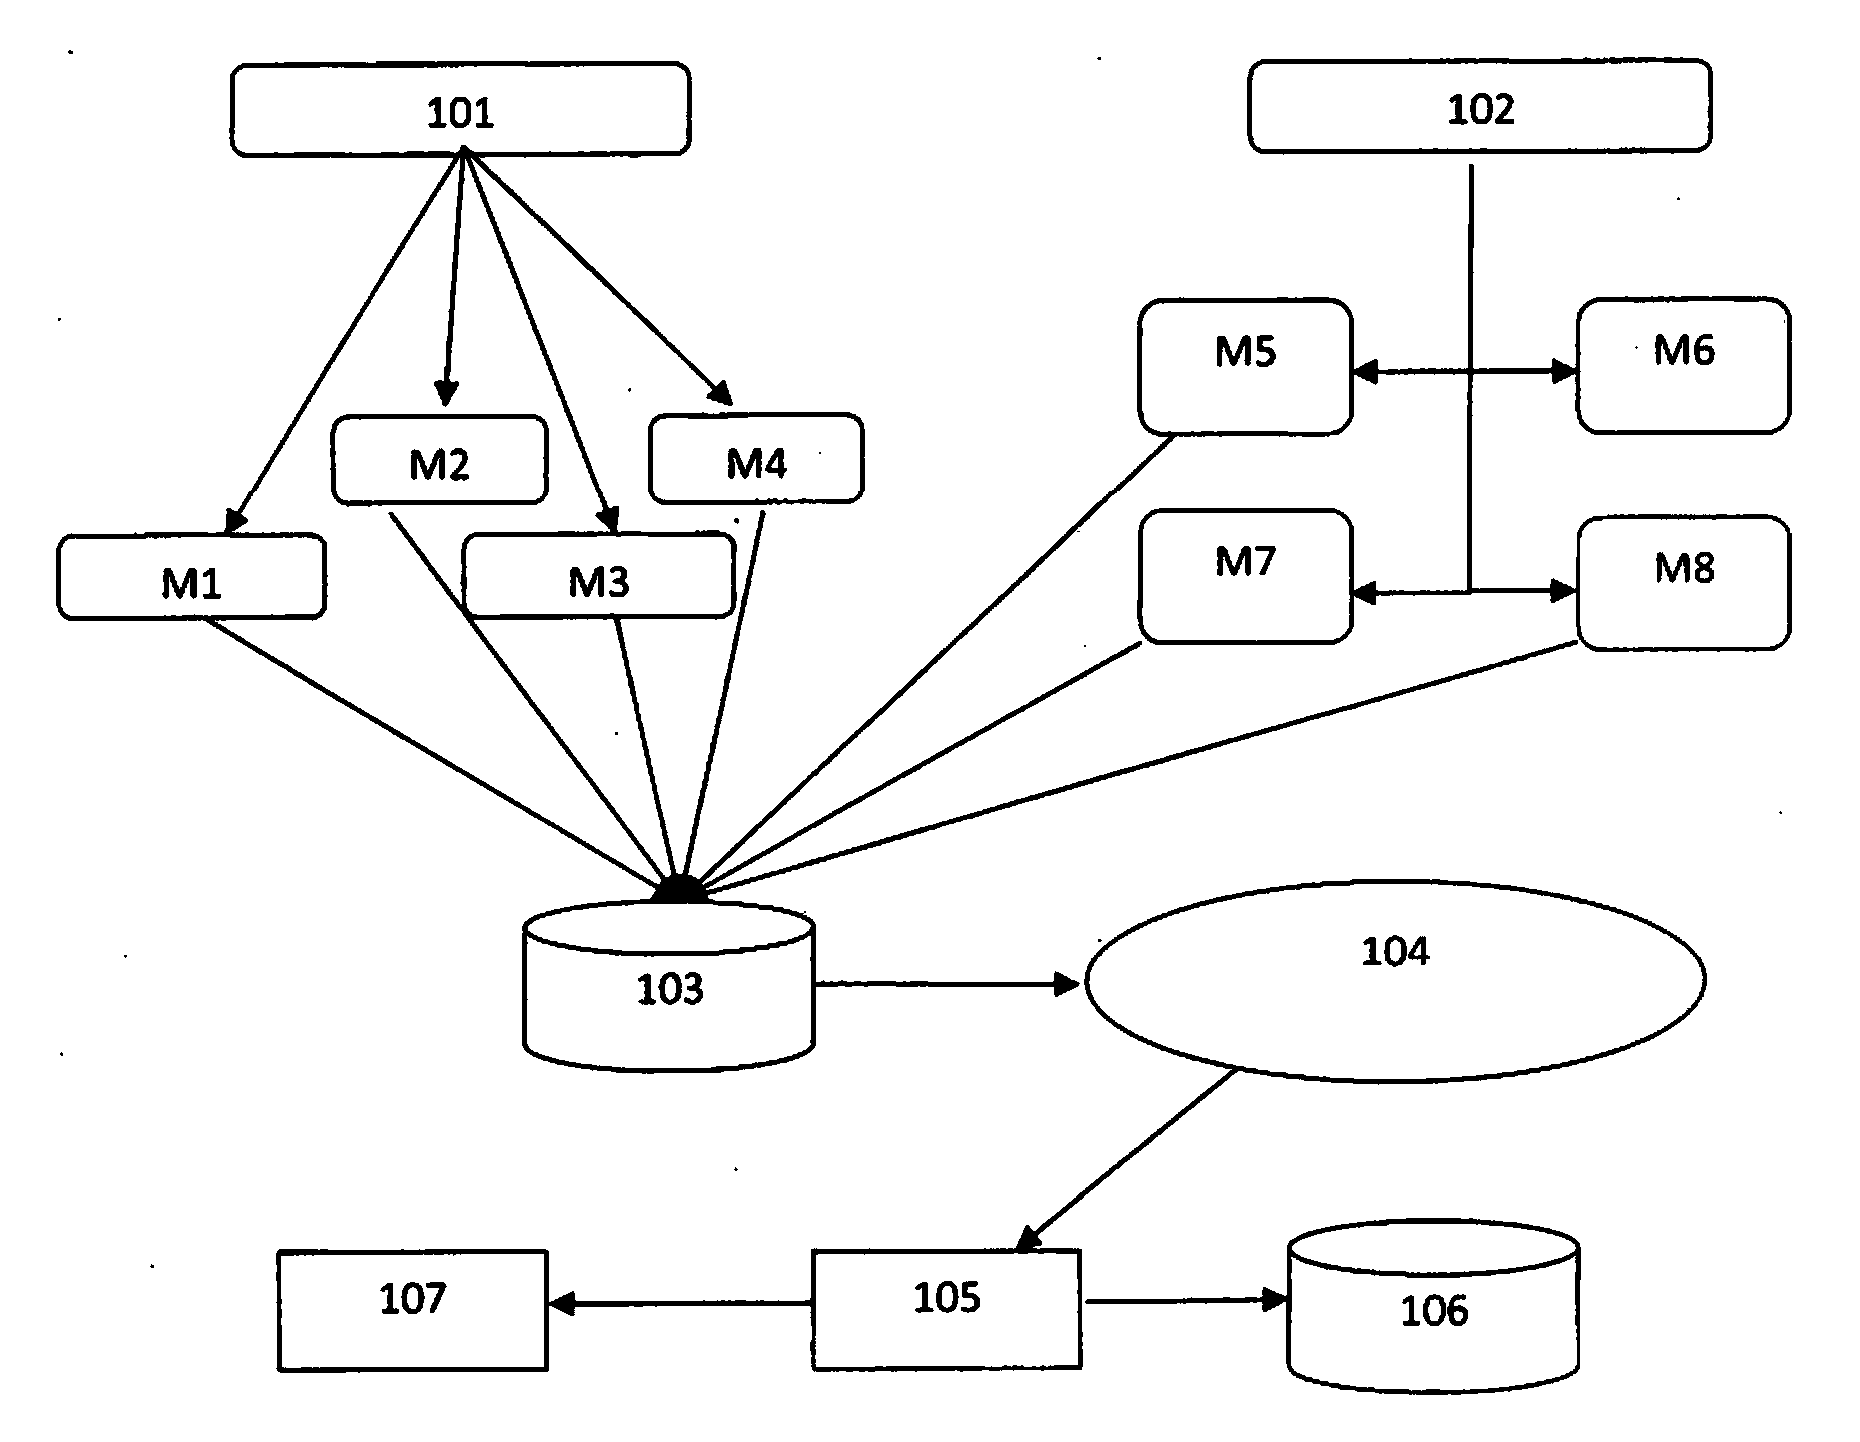 System and method for demographic analytics based on multimodal information